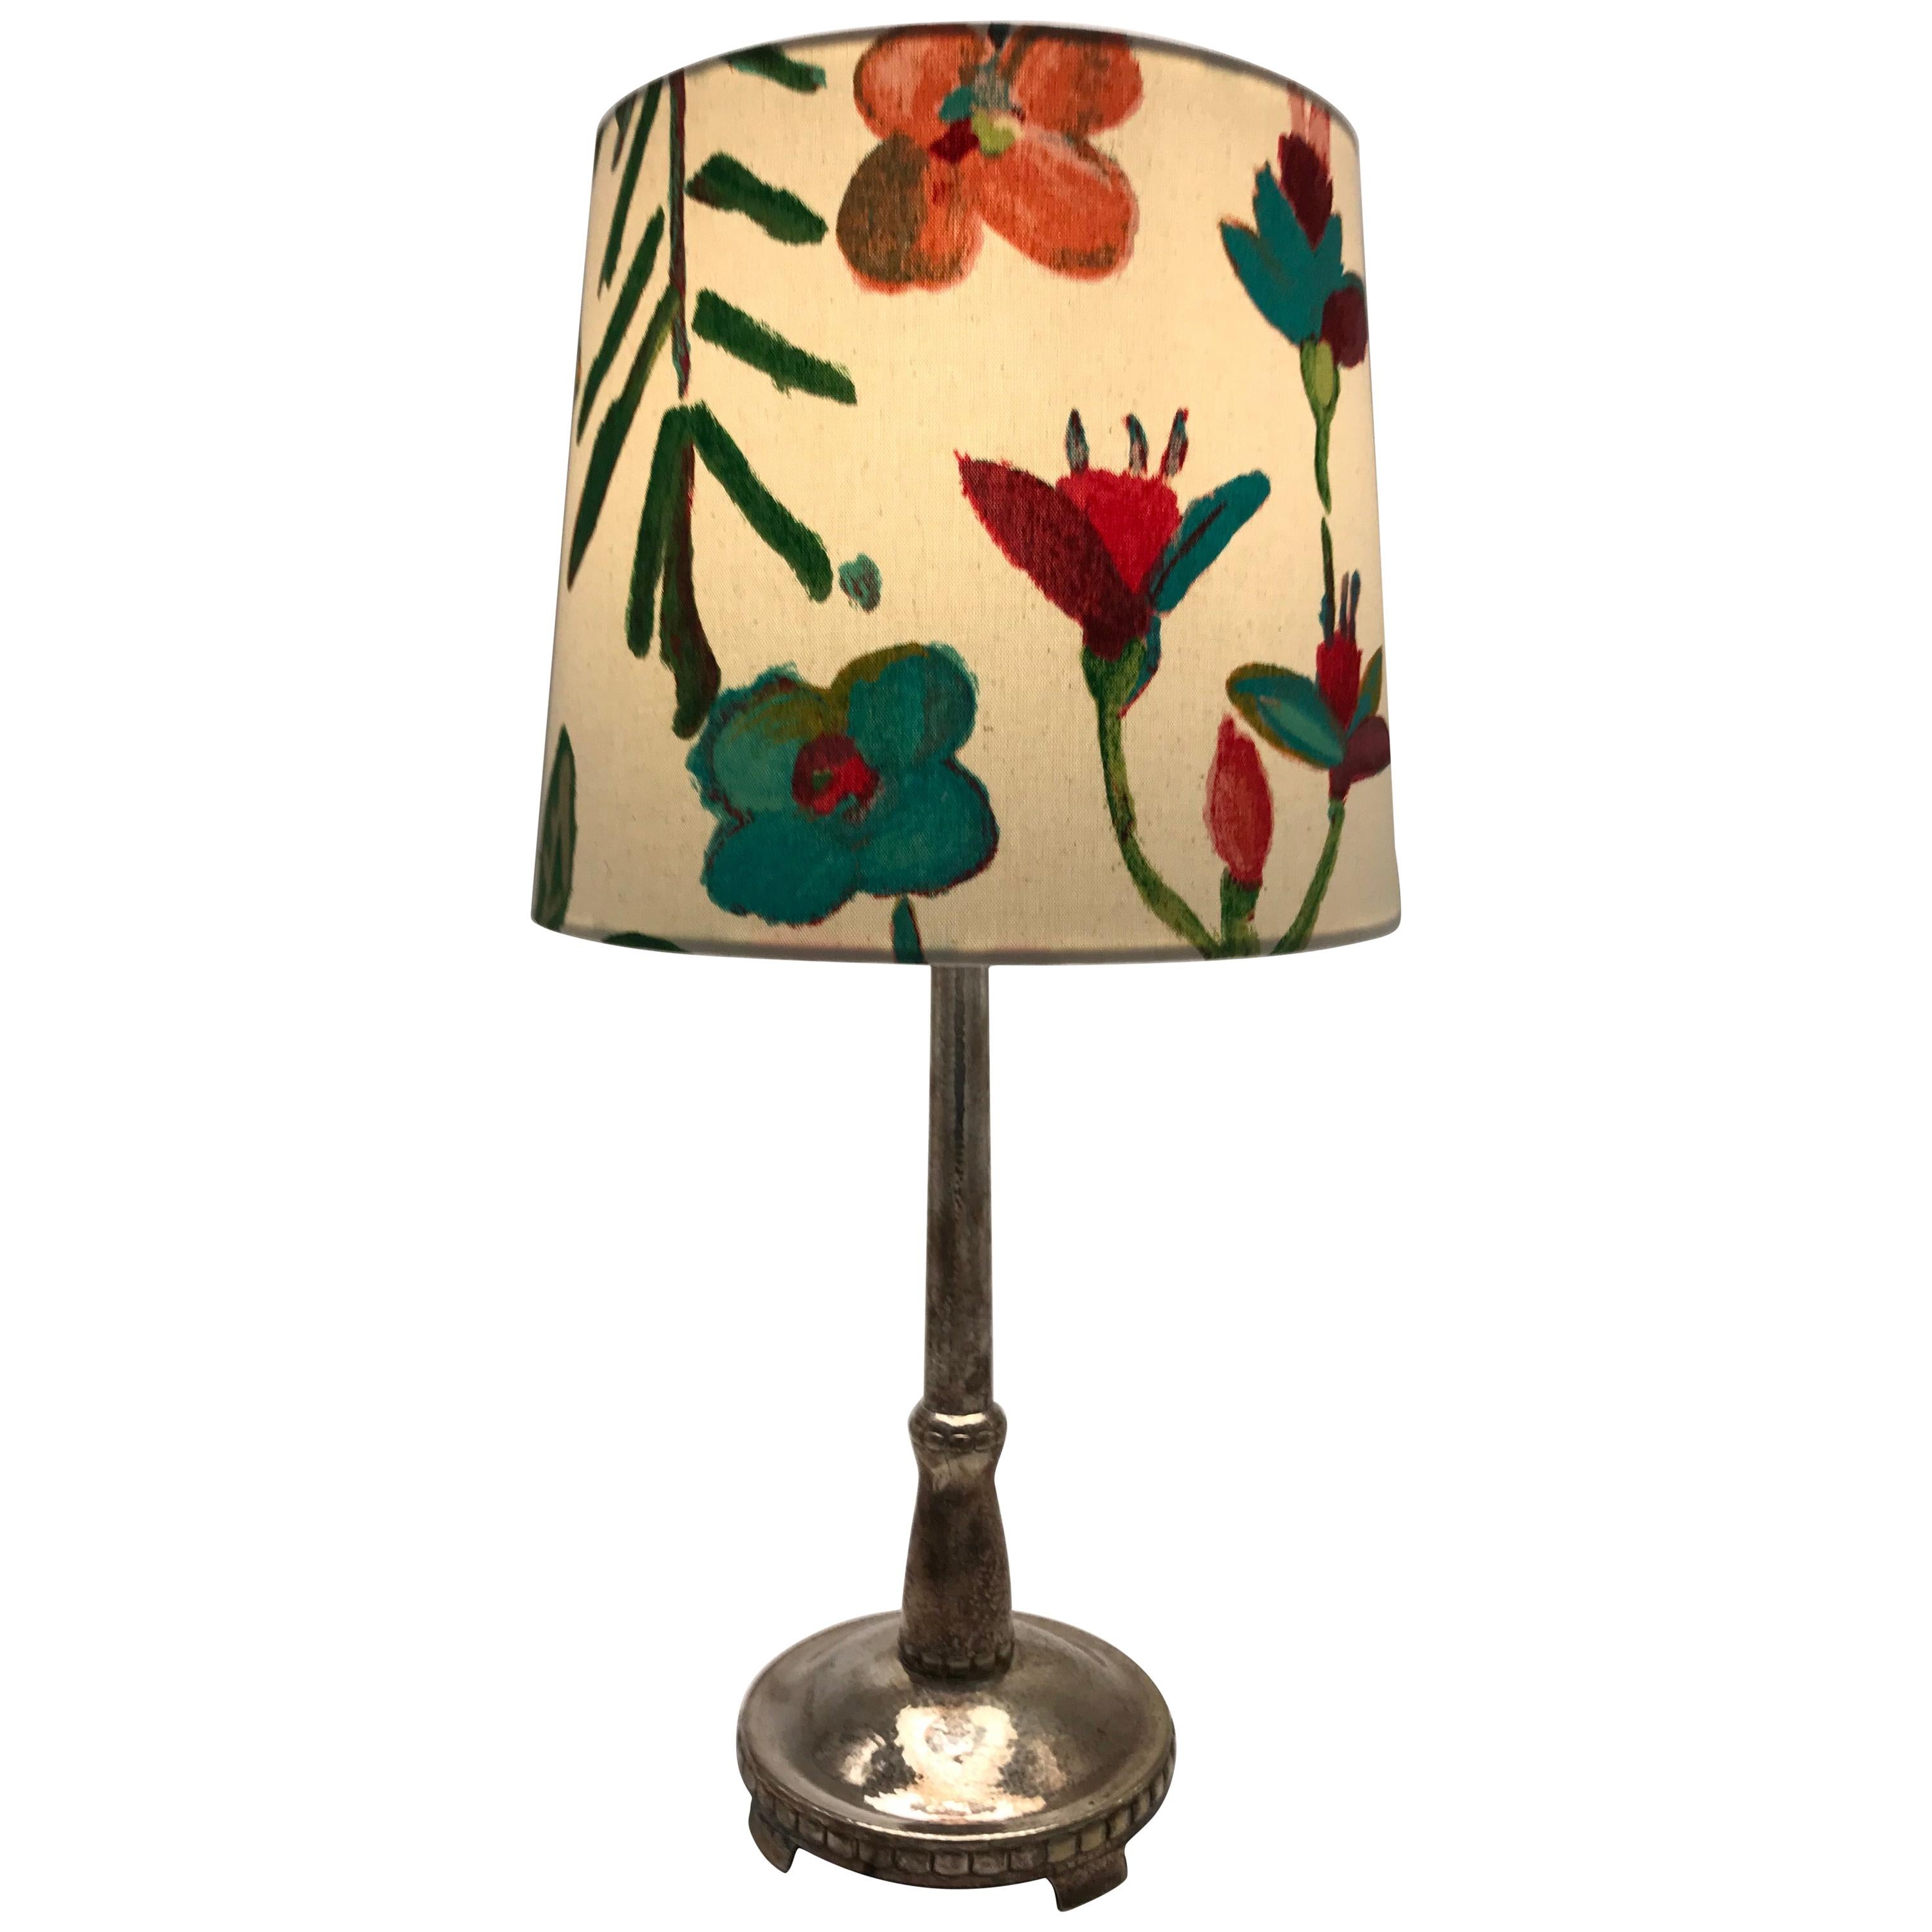 Art Deco Silver Plated Danish Table Lamp with a Limited Edition ArtbyMaj Shade